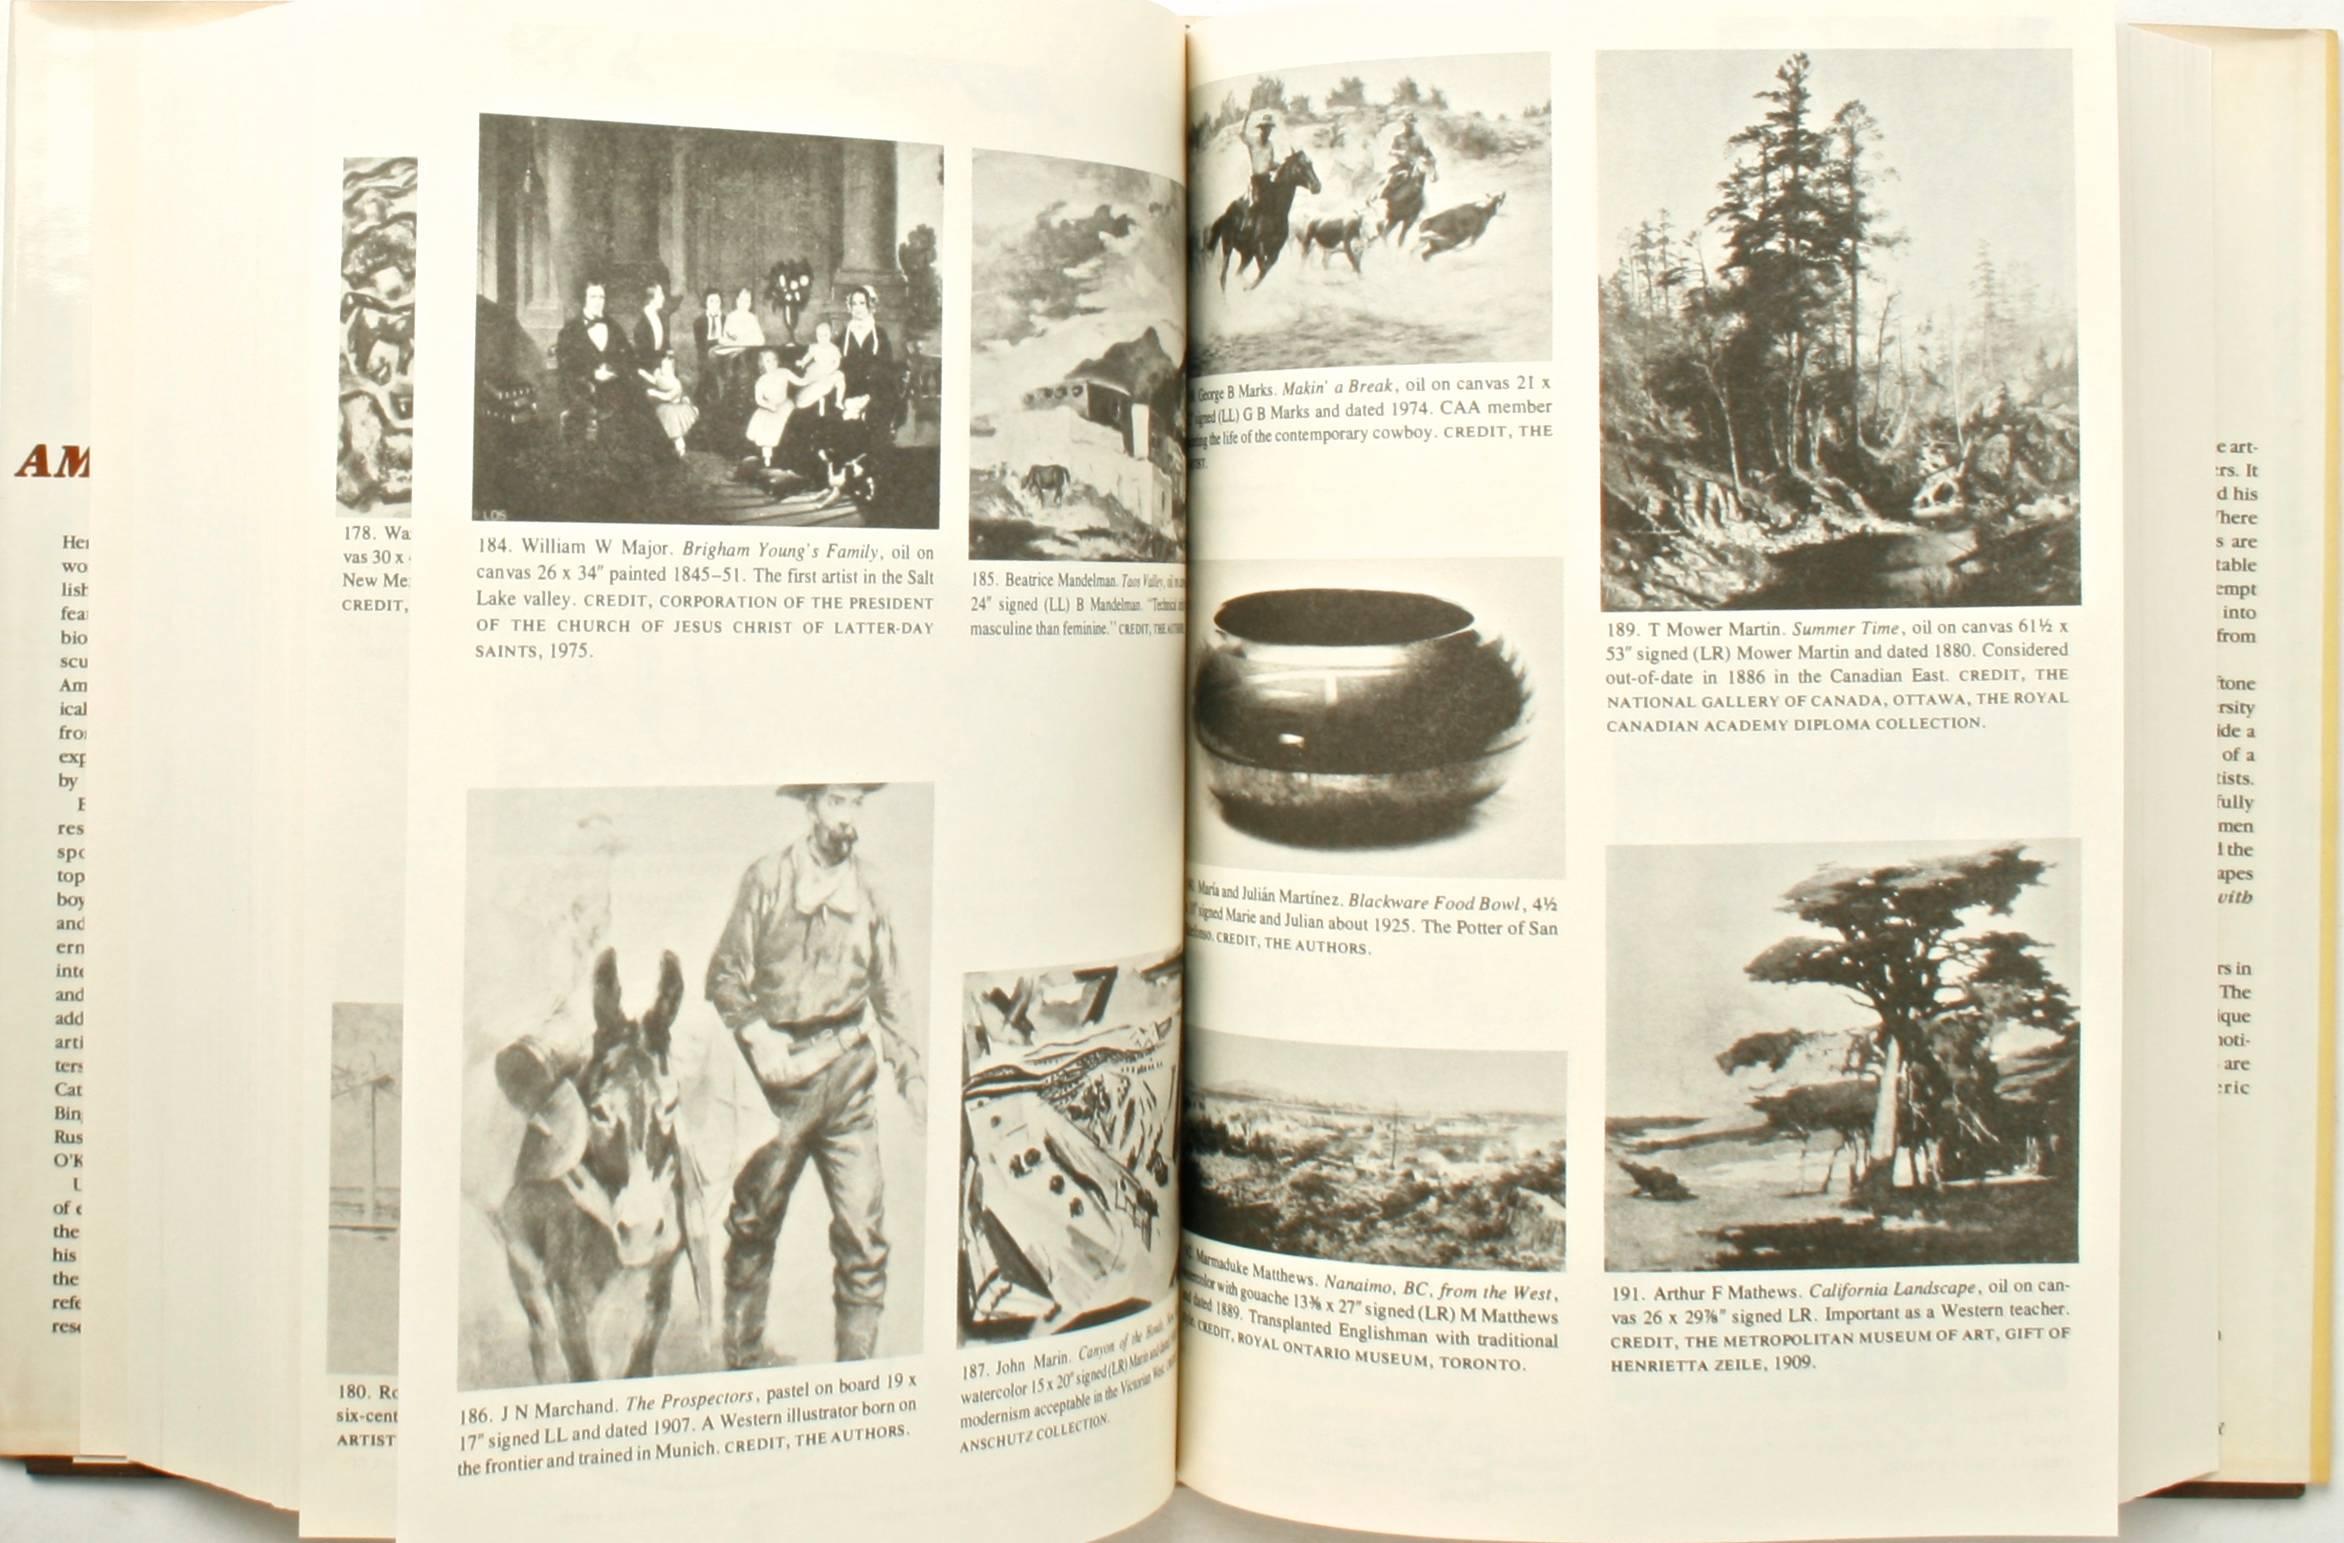 Samuel's Encyclopedia of Artists of the American West by Peggy and Harold Samuels. New York, Book Sales, Inc., 1985. First edition hardcover with dust jacket. 547 pp. A comprehensive reference guide of Western American Art with over 1,700